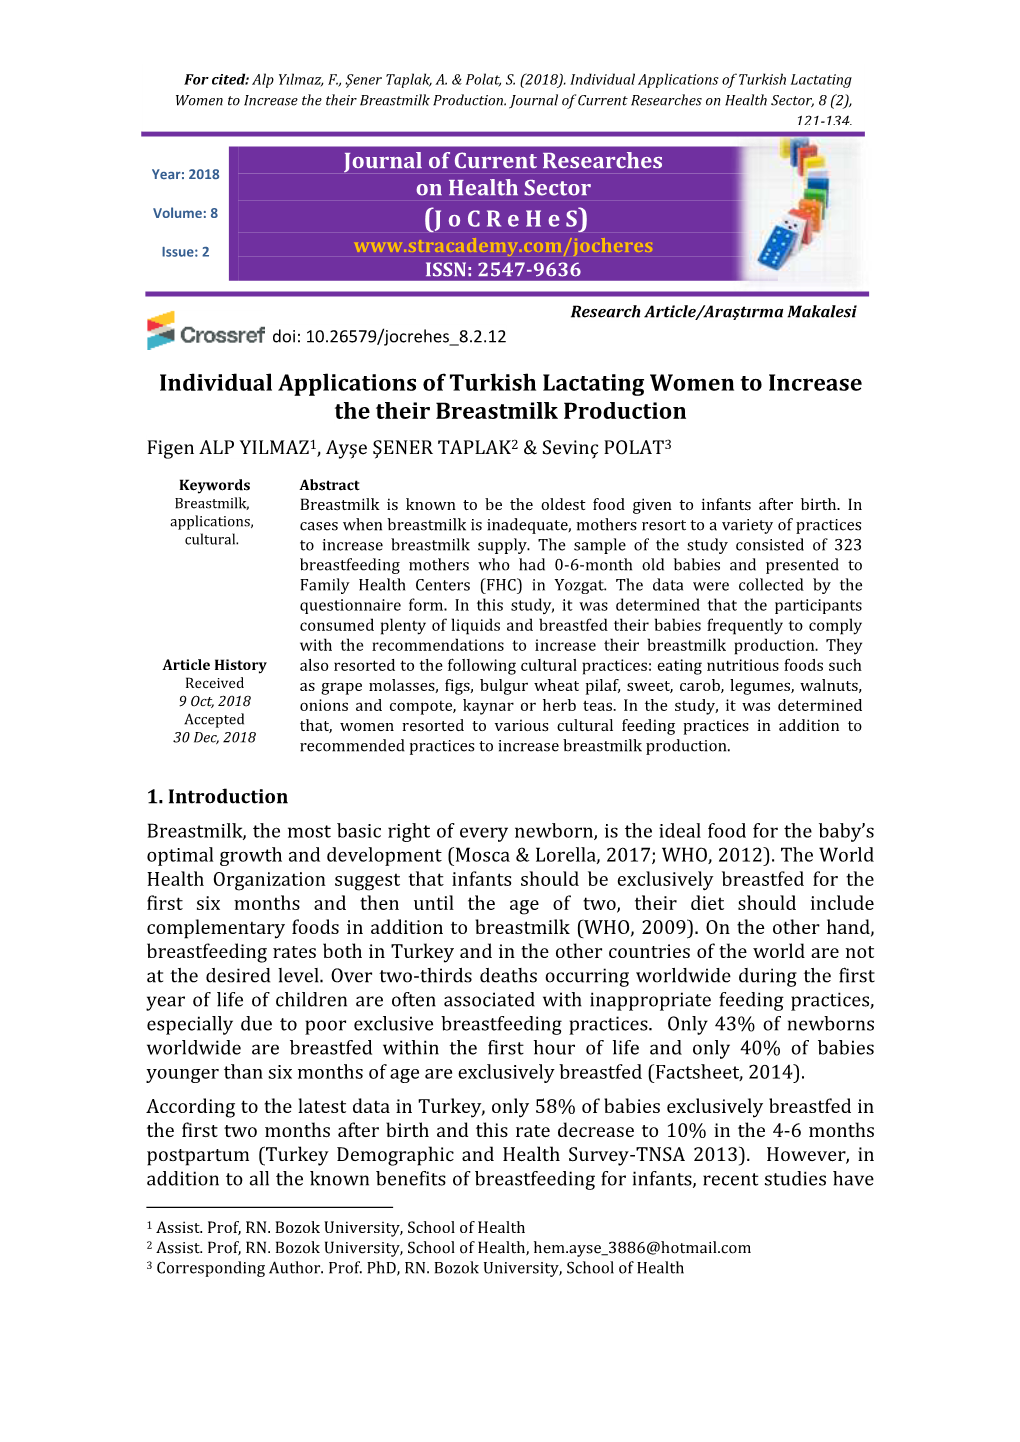 Individual Applications of Turkish Lactating Women to Increase the Their Breastmilk Production